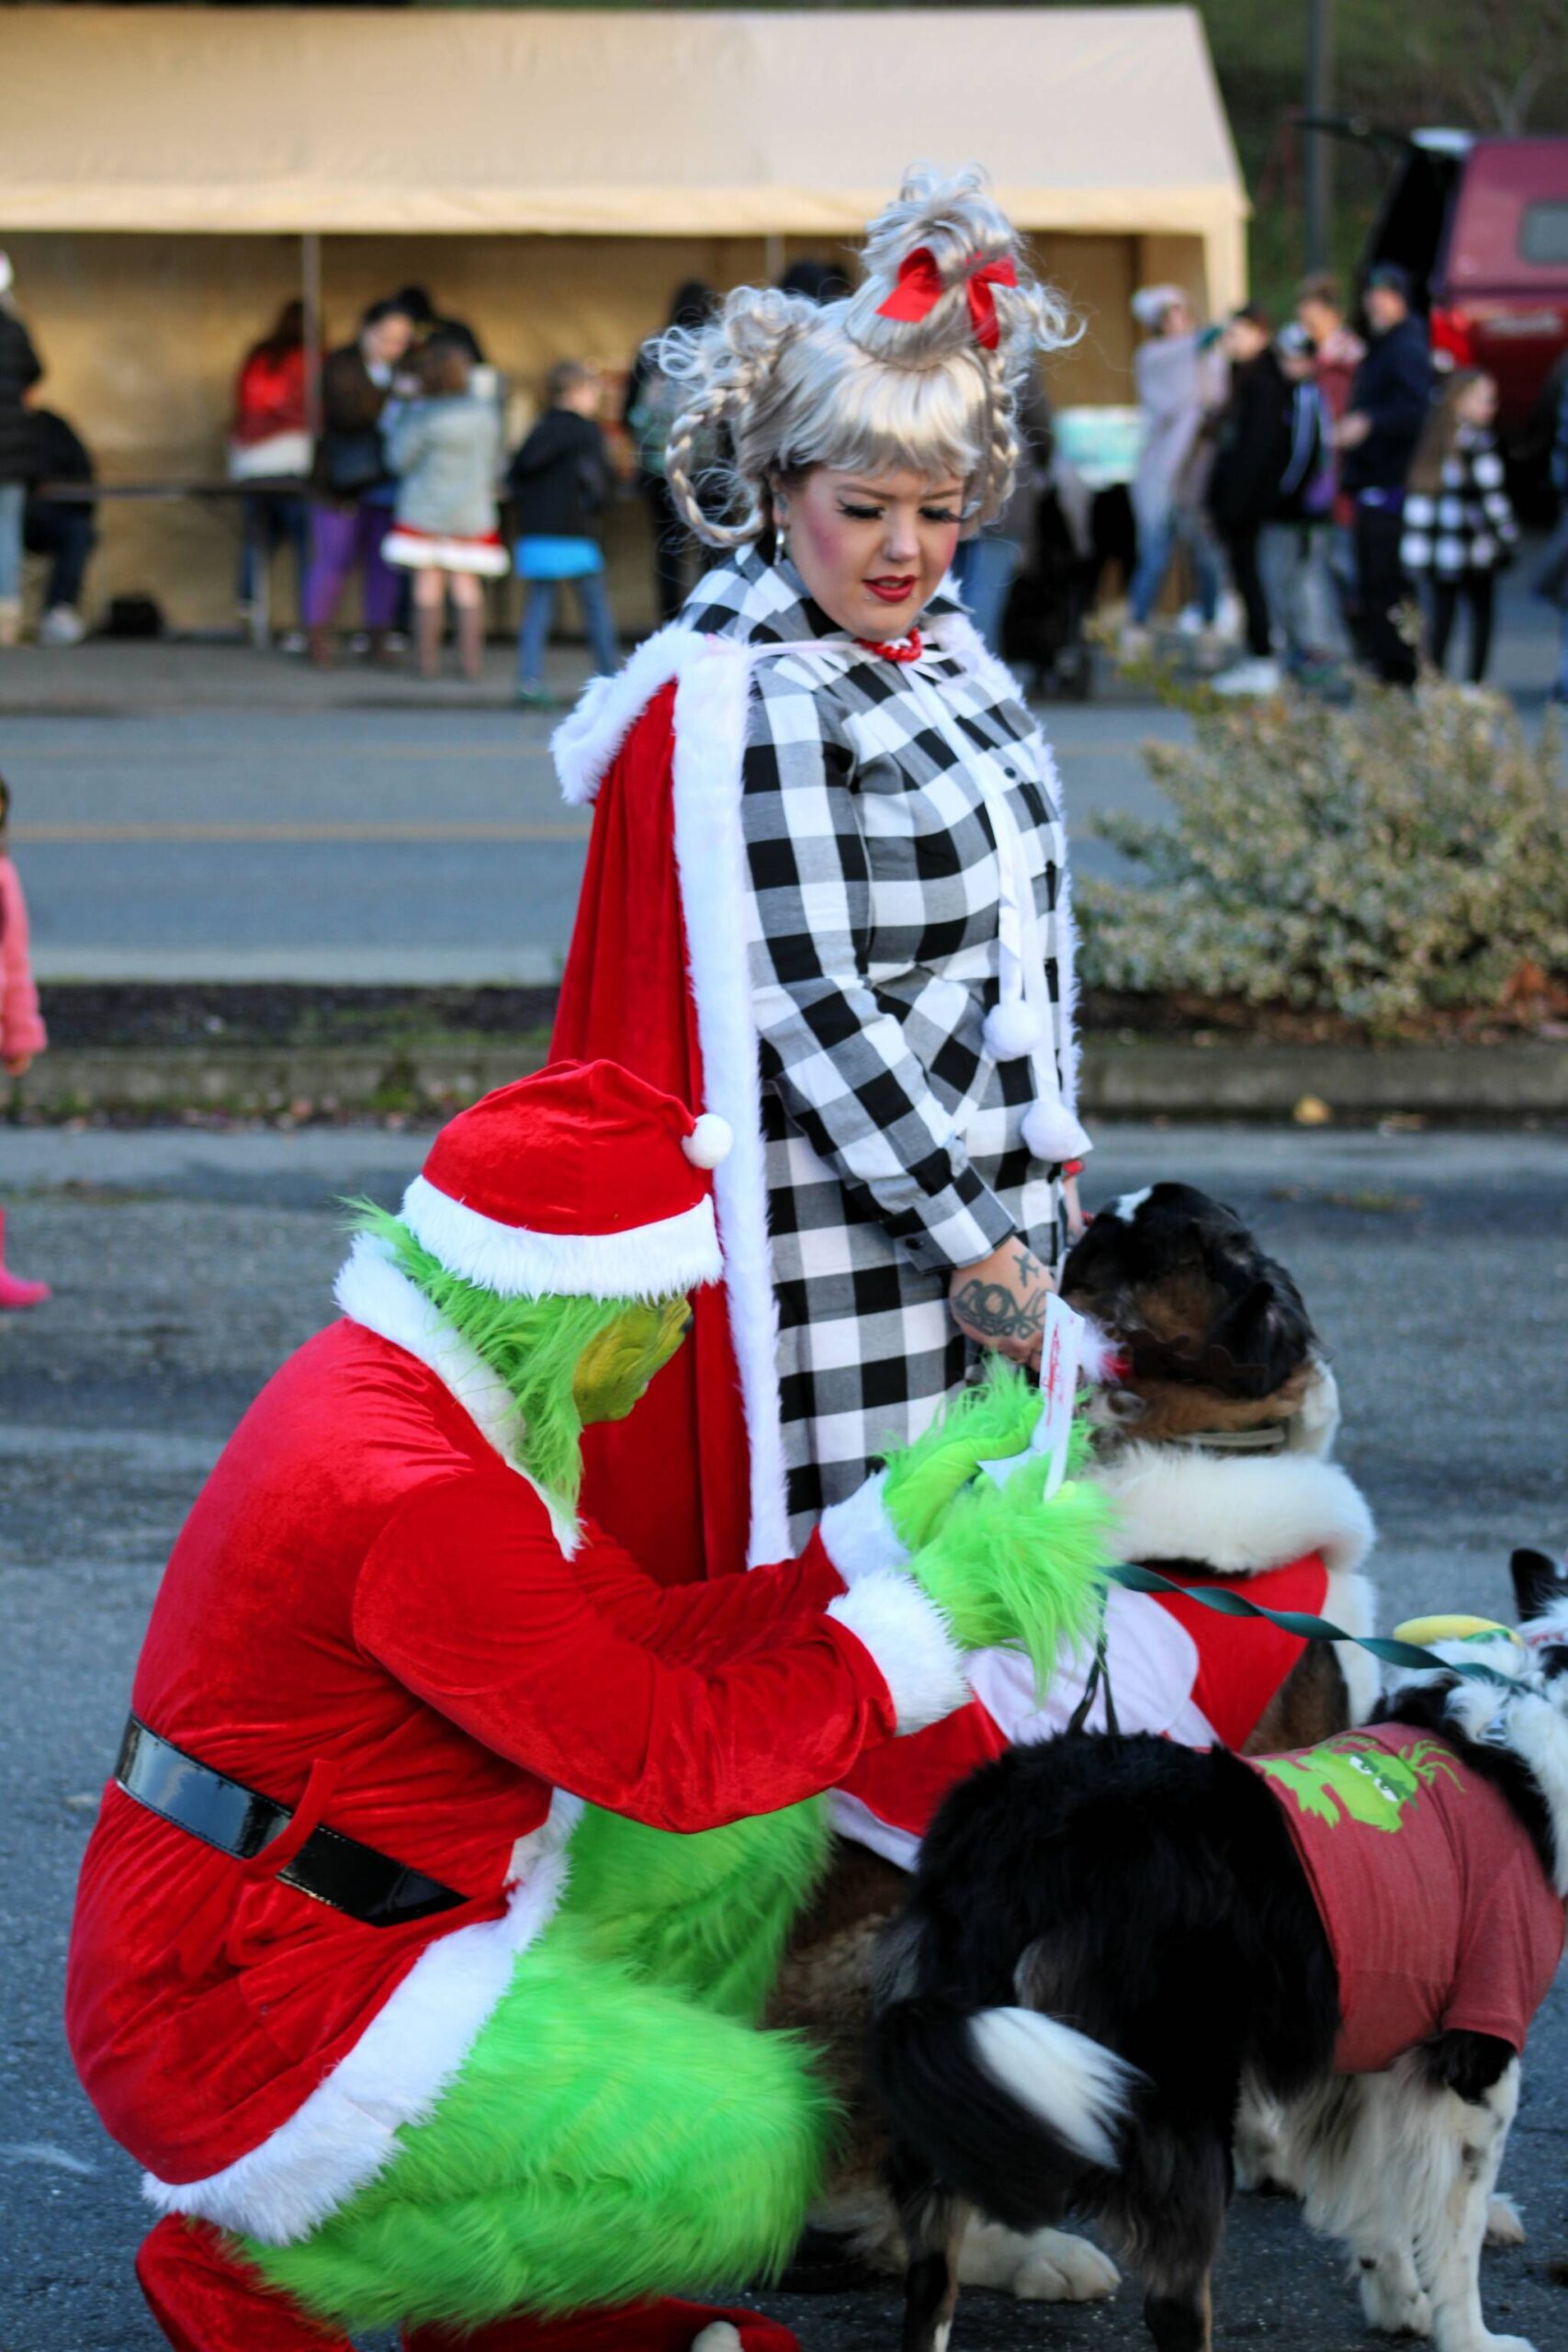 Chase Austin (lower left) and Stephanie Gay (center) show they’ve got plenty of holiday style in their parade-winning costumes.